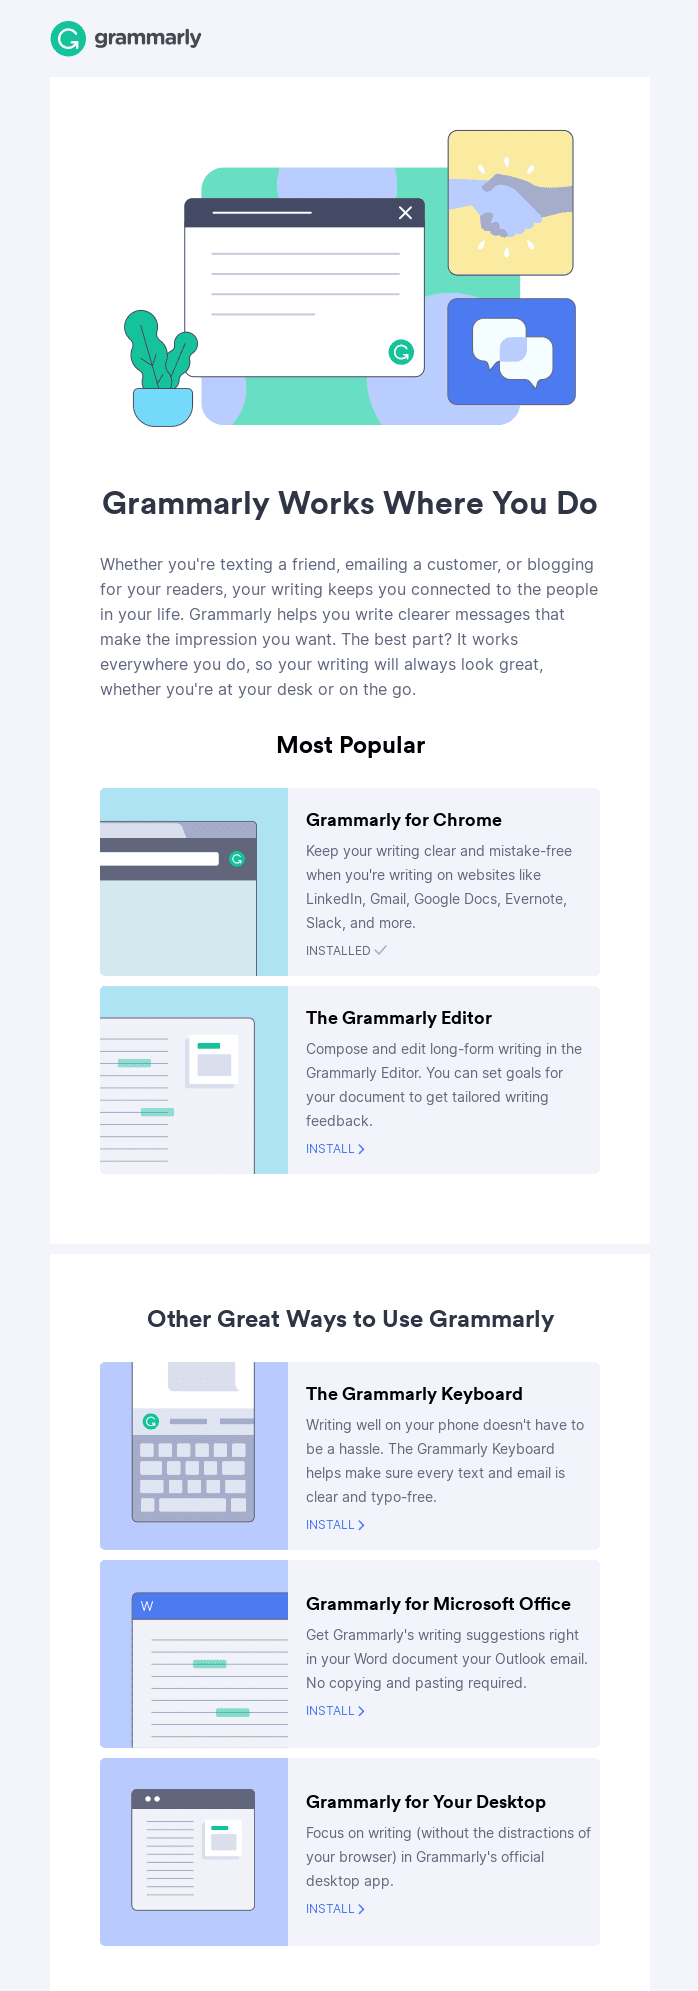 Get the most out of your grammarly account